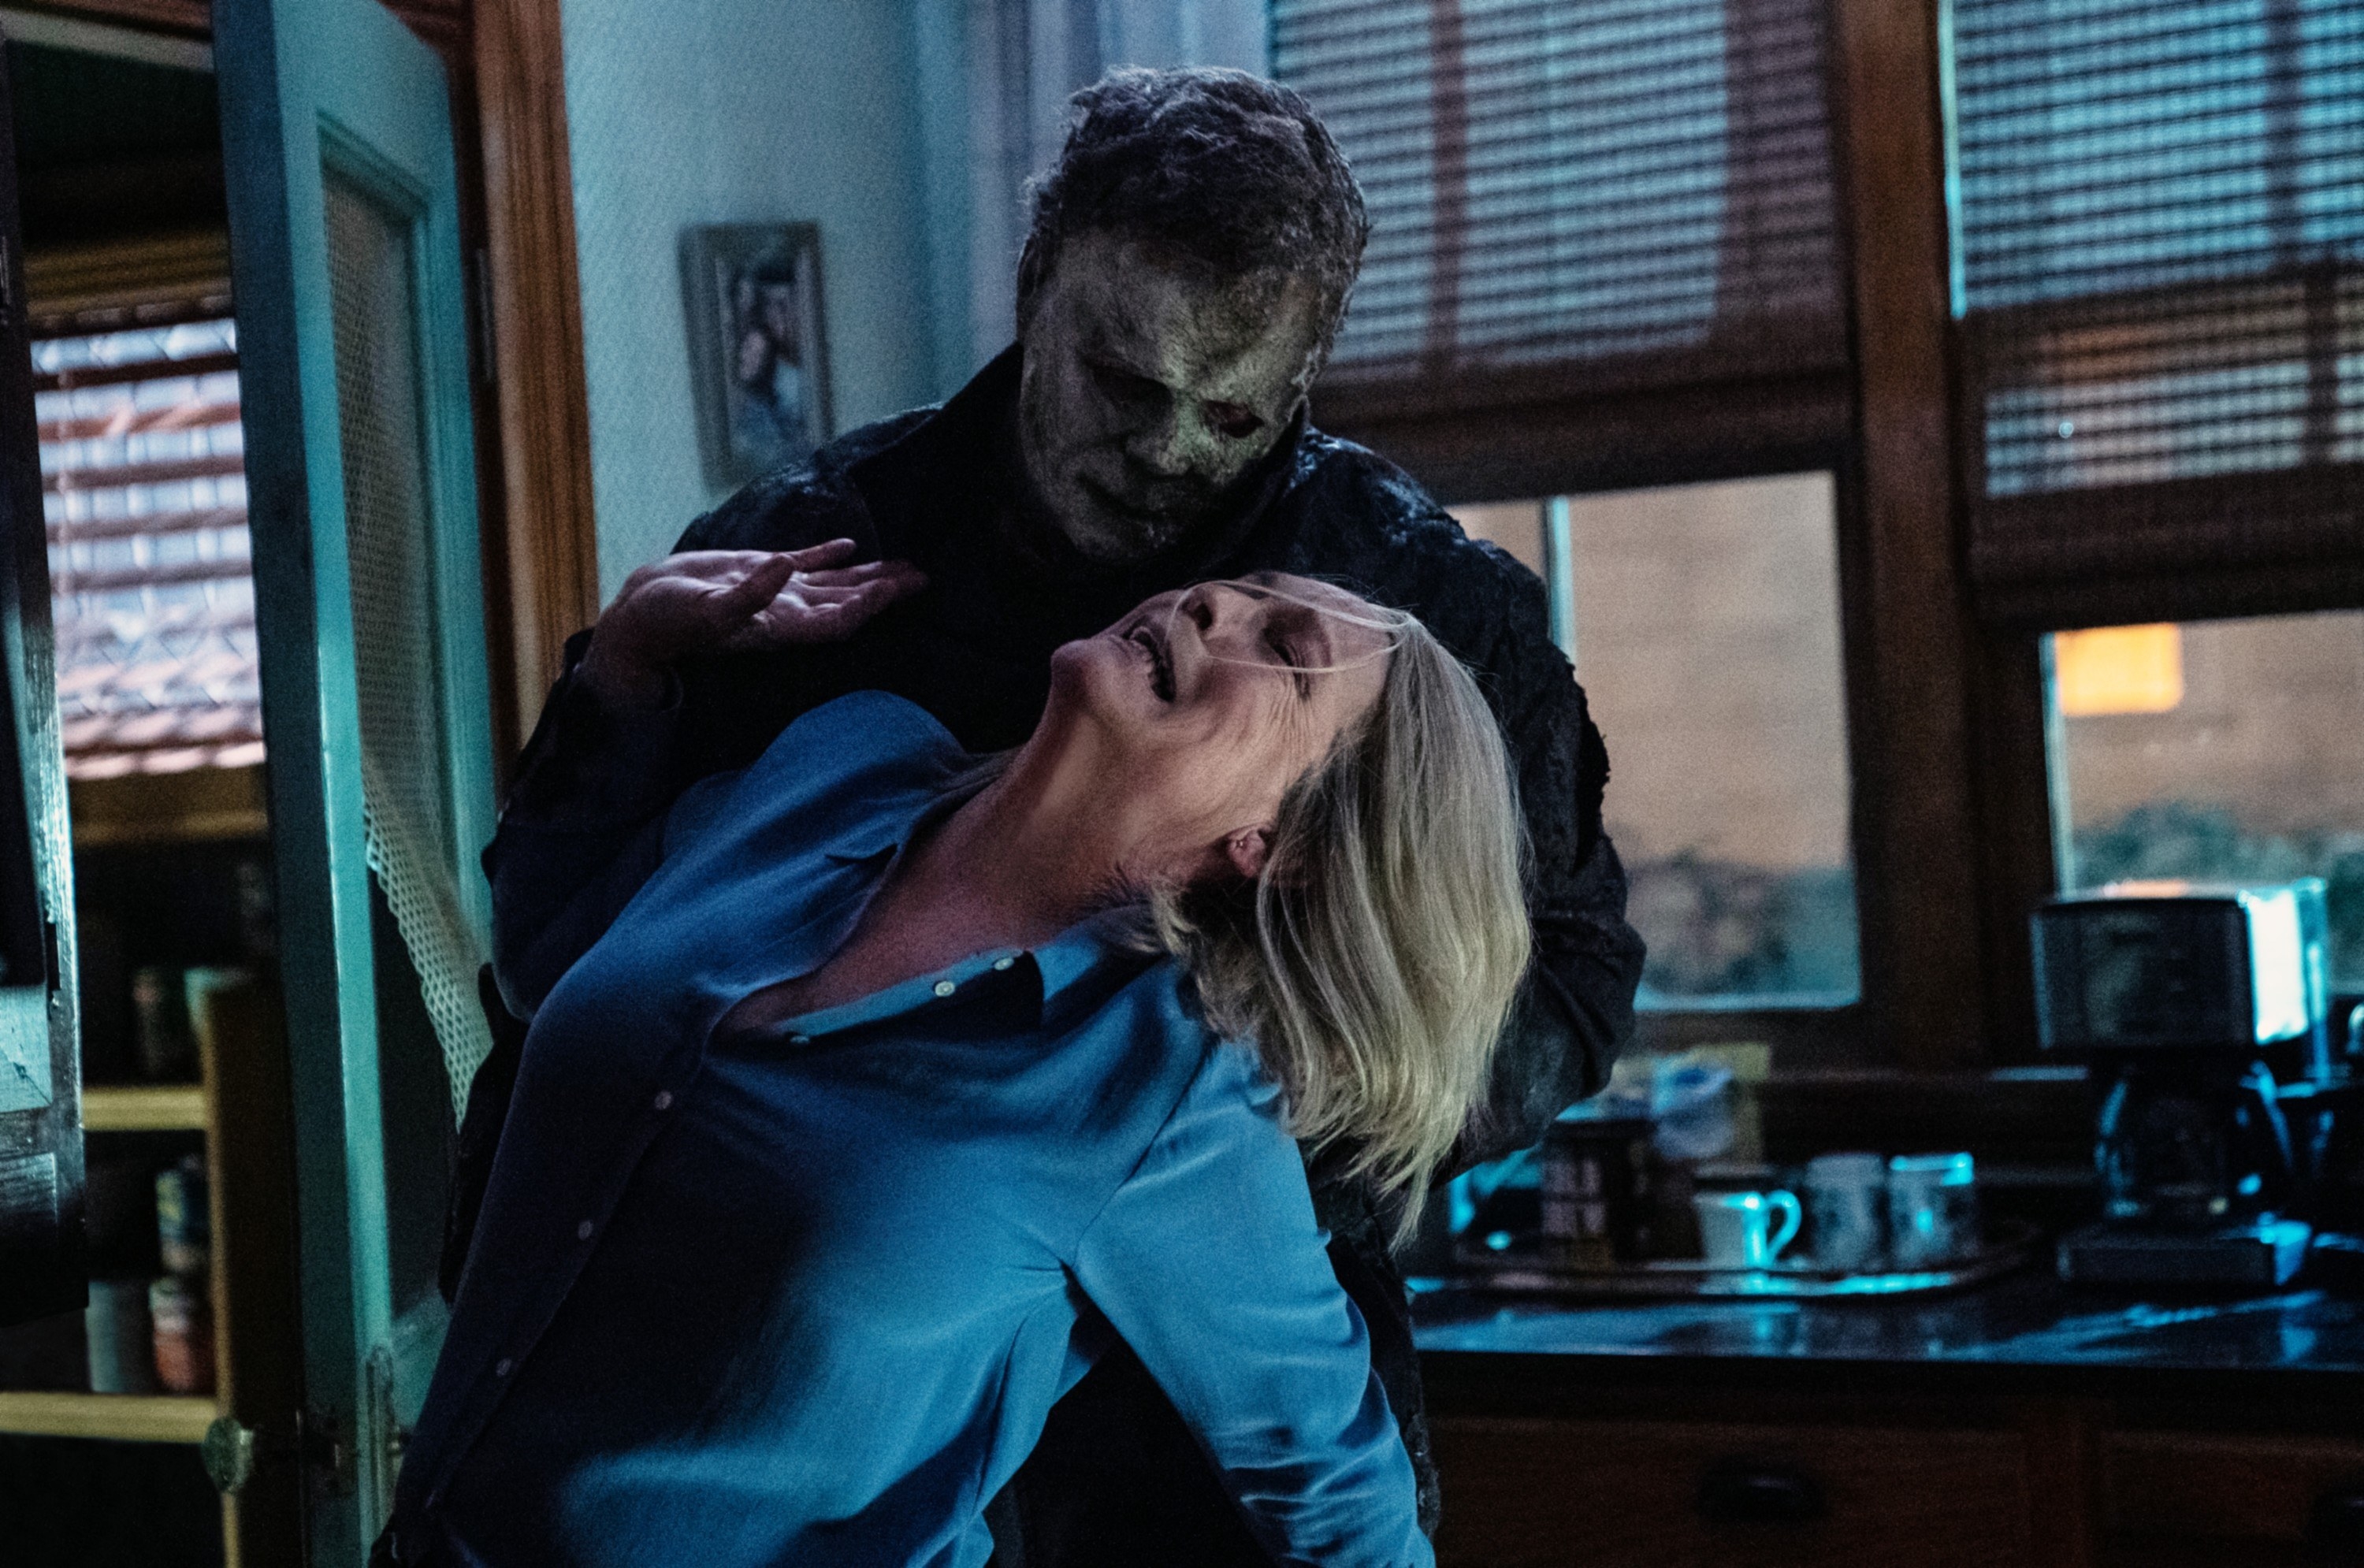 Michael Myers attacks Laurie Strode